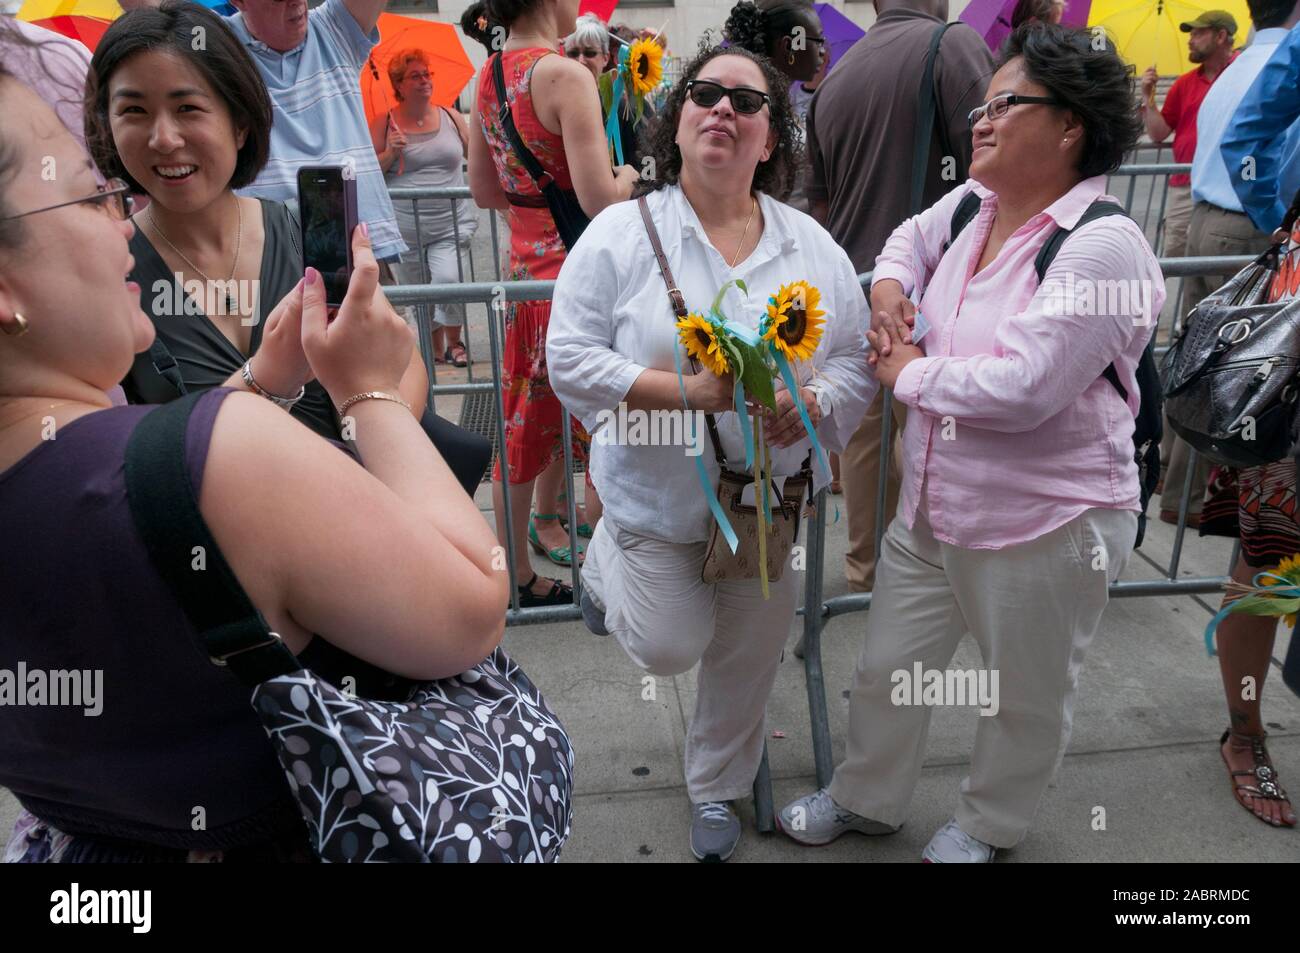 A lesbian couple waits in line outside the Manhattan City Clerk's office on the first day of legal same-sex marriage in New York State, USA. Stock Photo